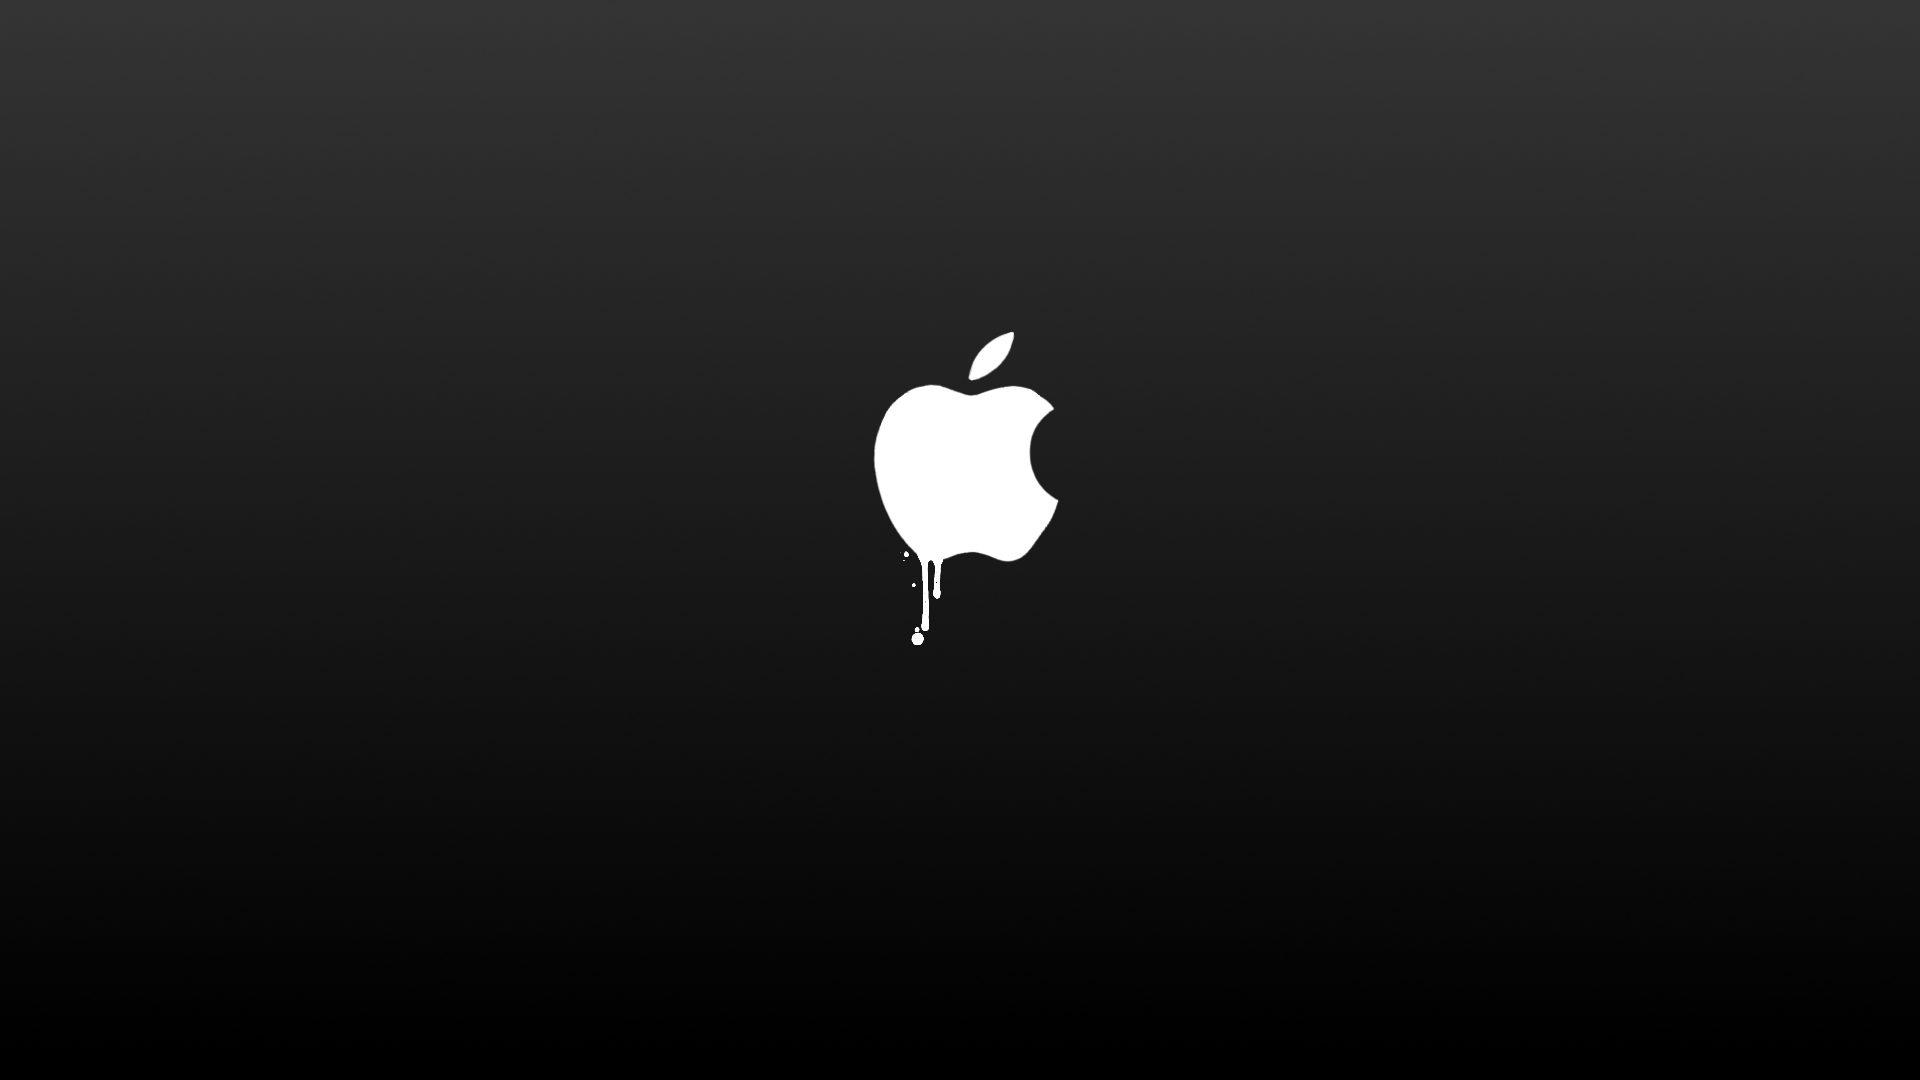 Black Mac Wallpaper Hd Images amp Pictures   Becuo